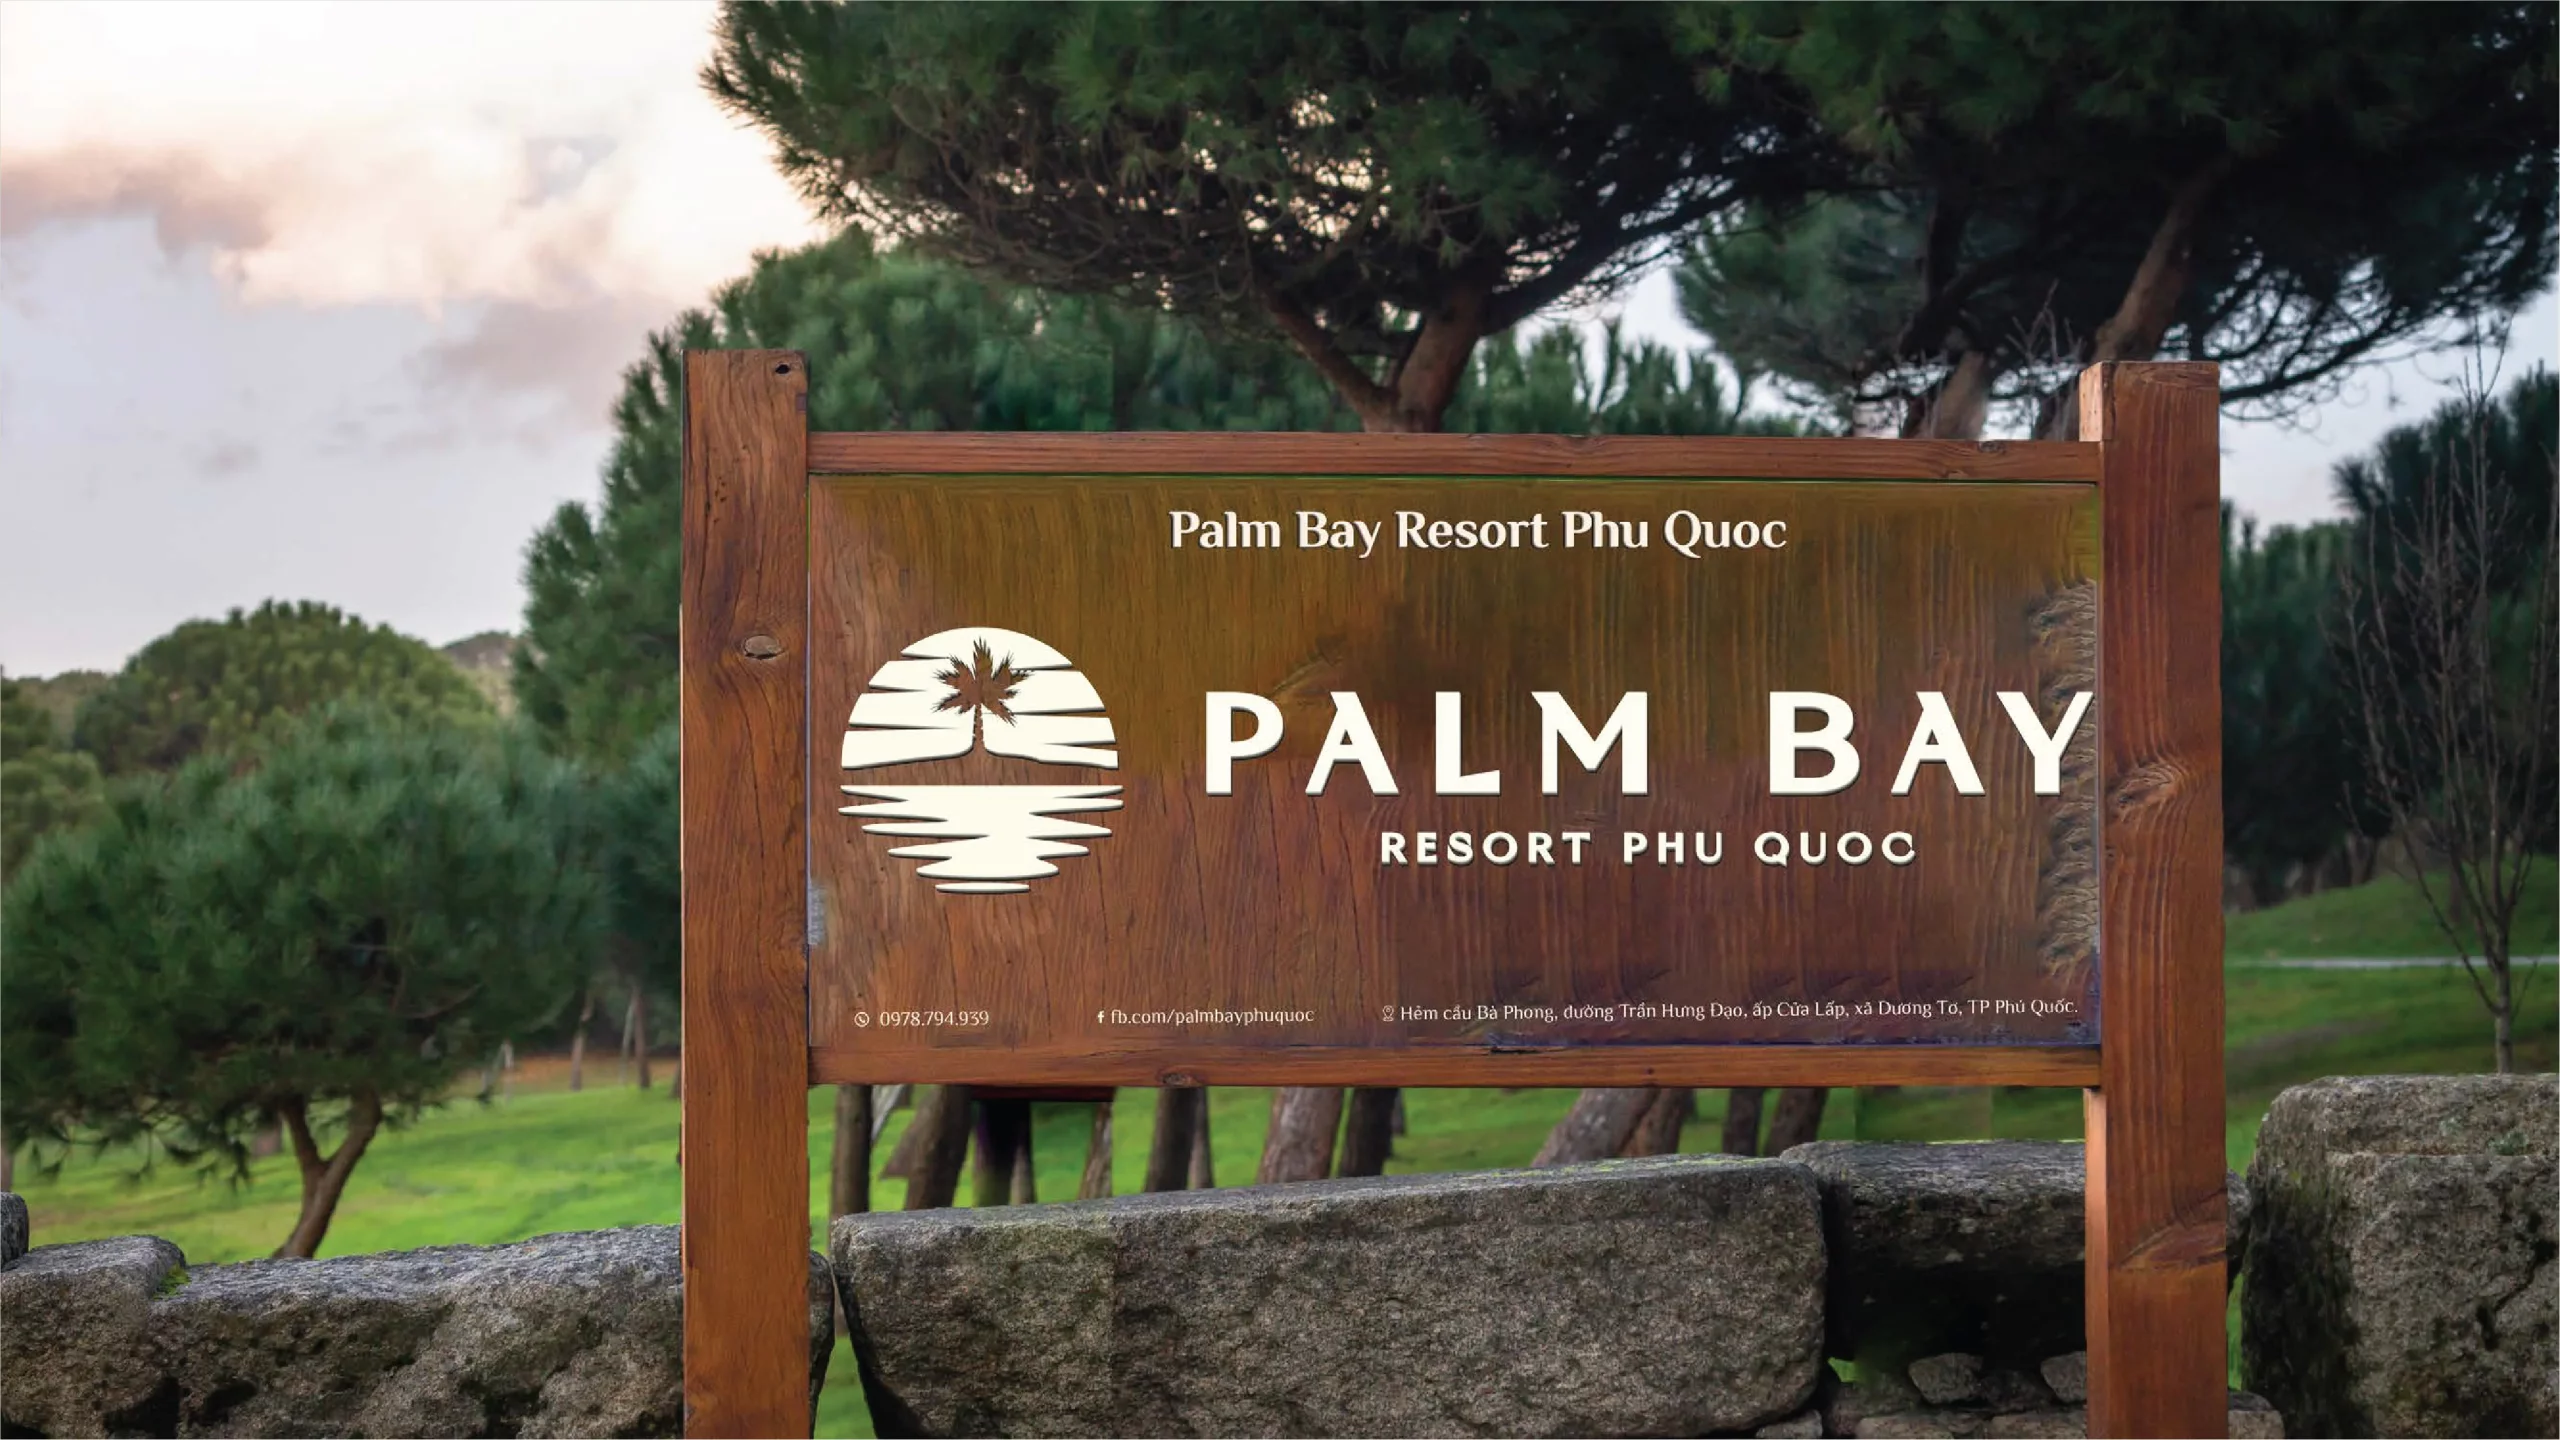 Palm Bay Resort Phu Quoc 26 result scaled